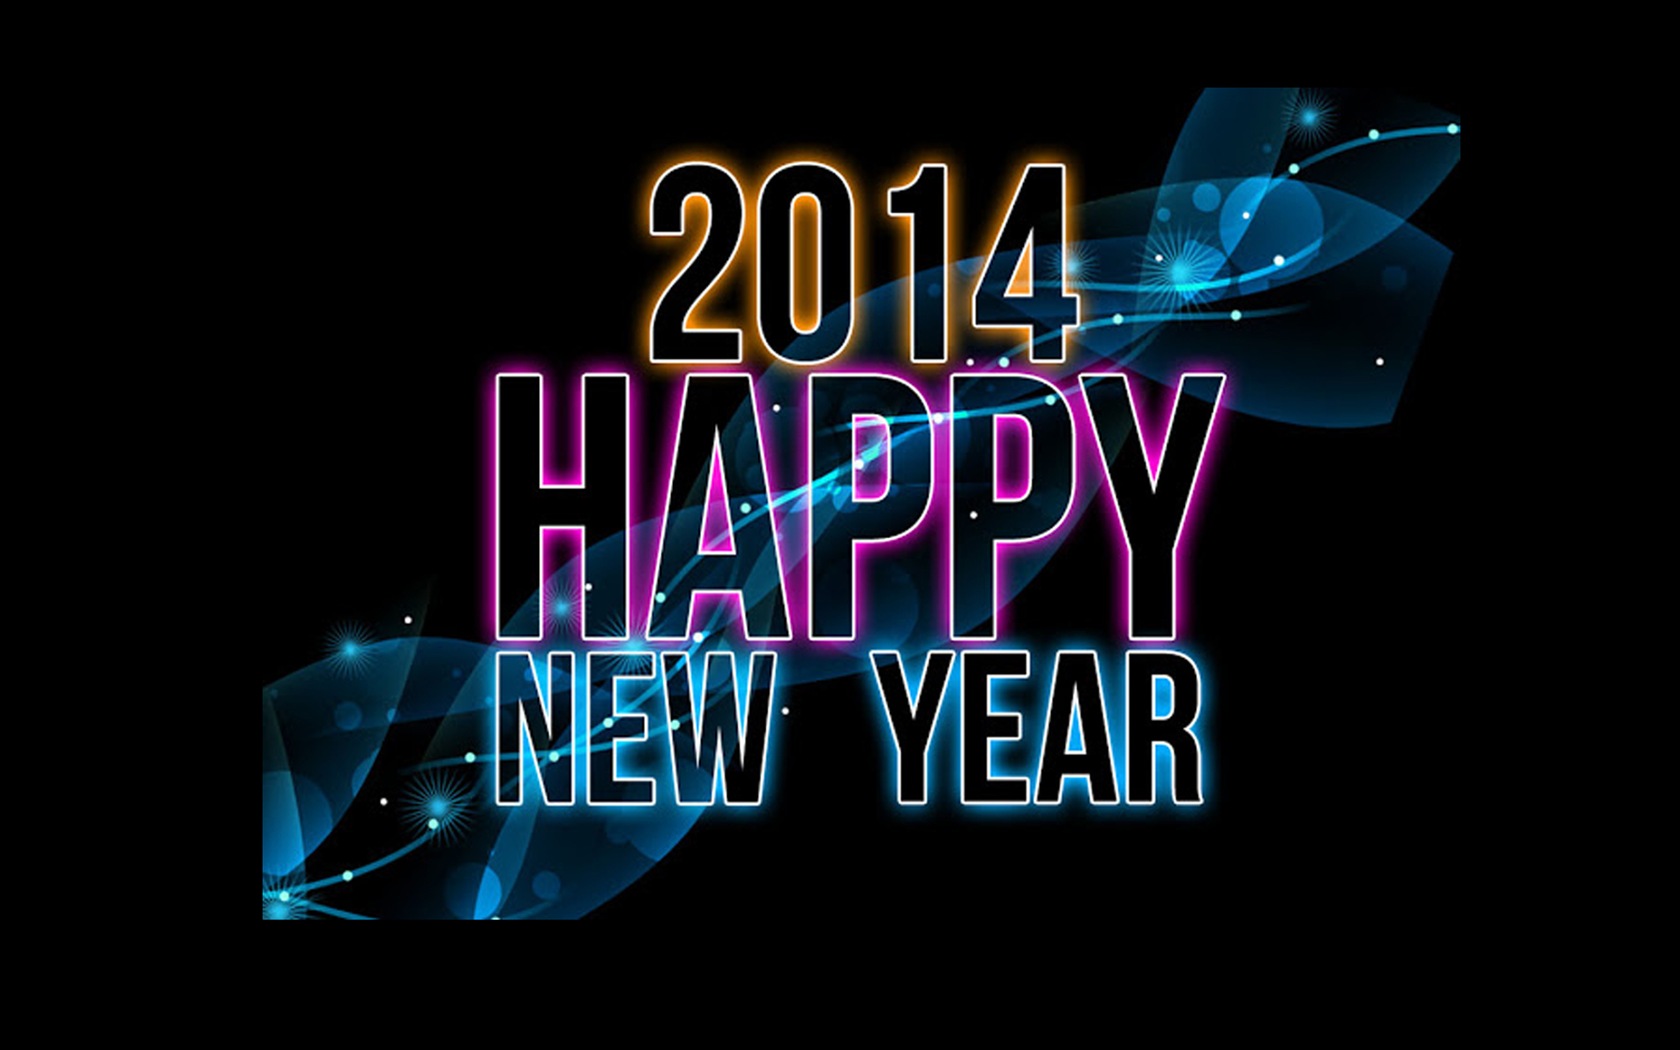 2014 New Year Theme HD Wallpapers (1) #11 - 1680x1050